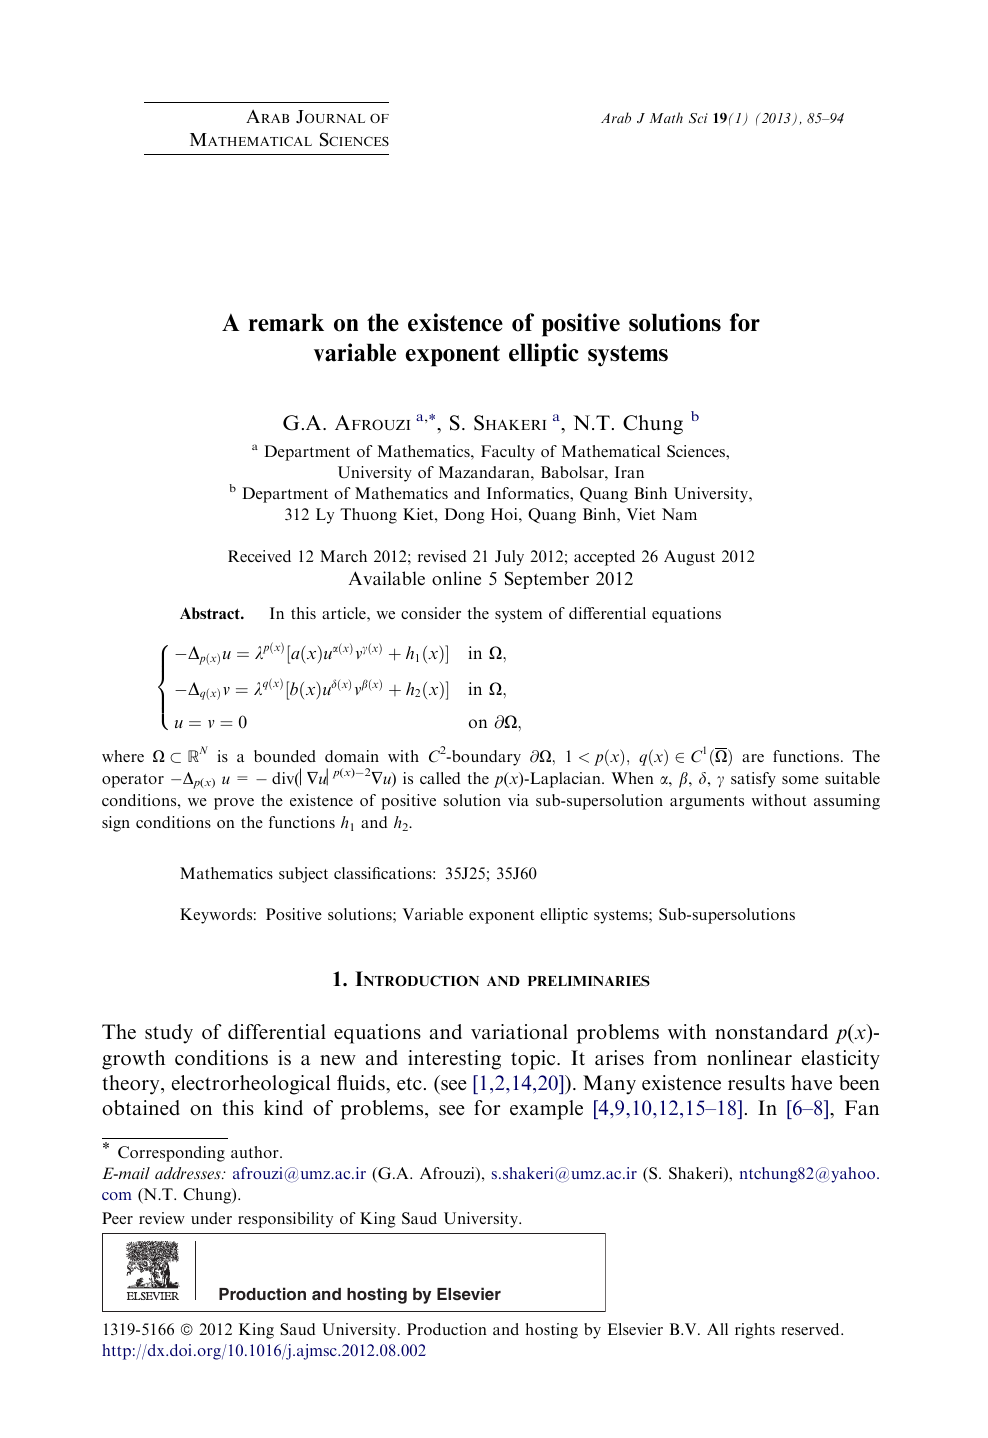 A Remark On The Existence Of Positive Solutions For Variable Exponent Elliptic Systems Topic Of Research Paper In Mathematics Download Scholarly Article Pdf And Read For Free On Cyberleninka Open Science